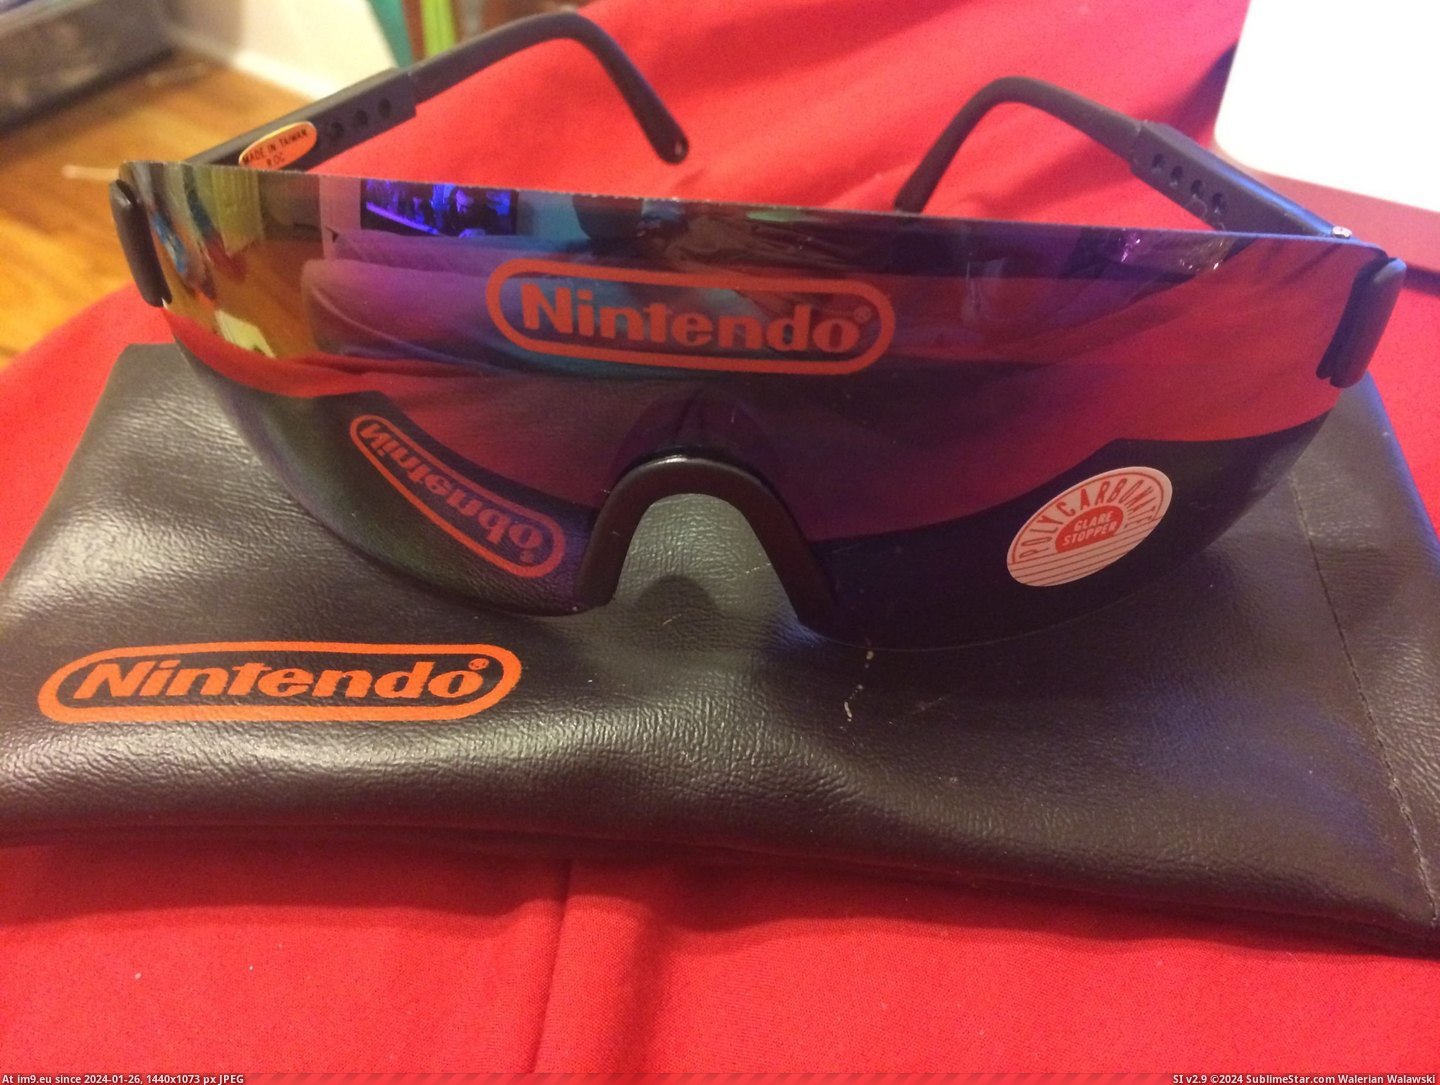 #Gaming #Storage #Unit #Sunglasses #Grandfather #Nintendo [Gaming] Anyone know anything about these Nintendo sunglasses? My Grandfather found them in his storage unit today. Pic. (Image of album My r/GAMING favs))